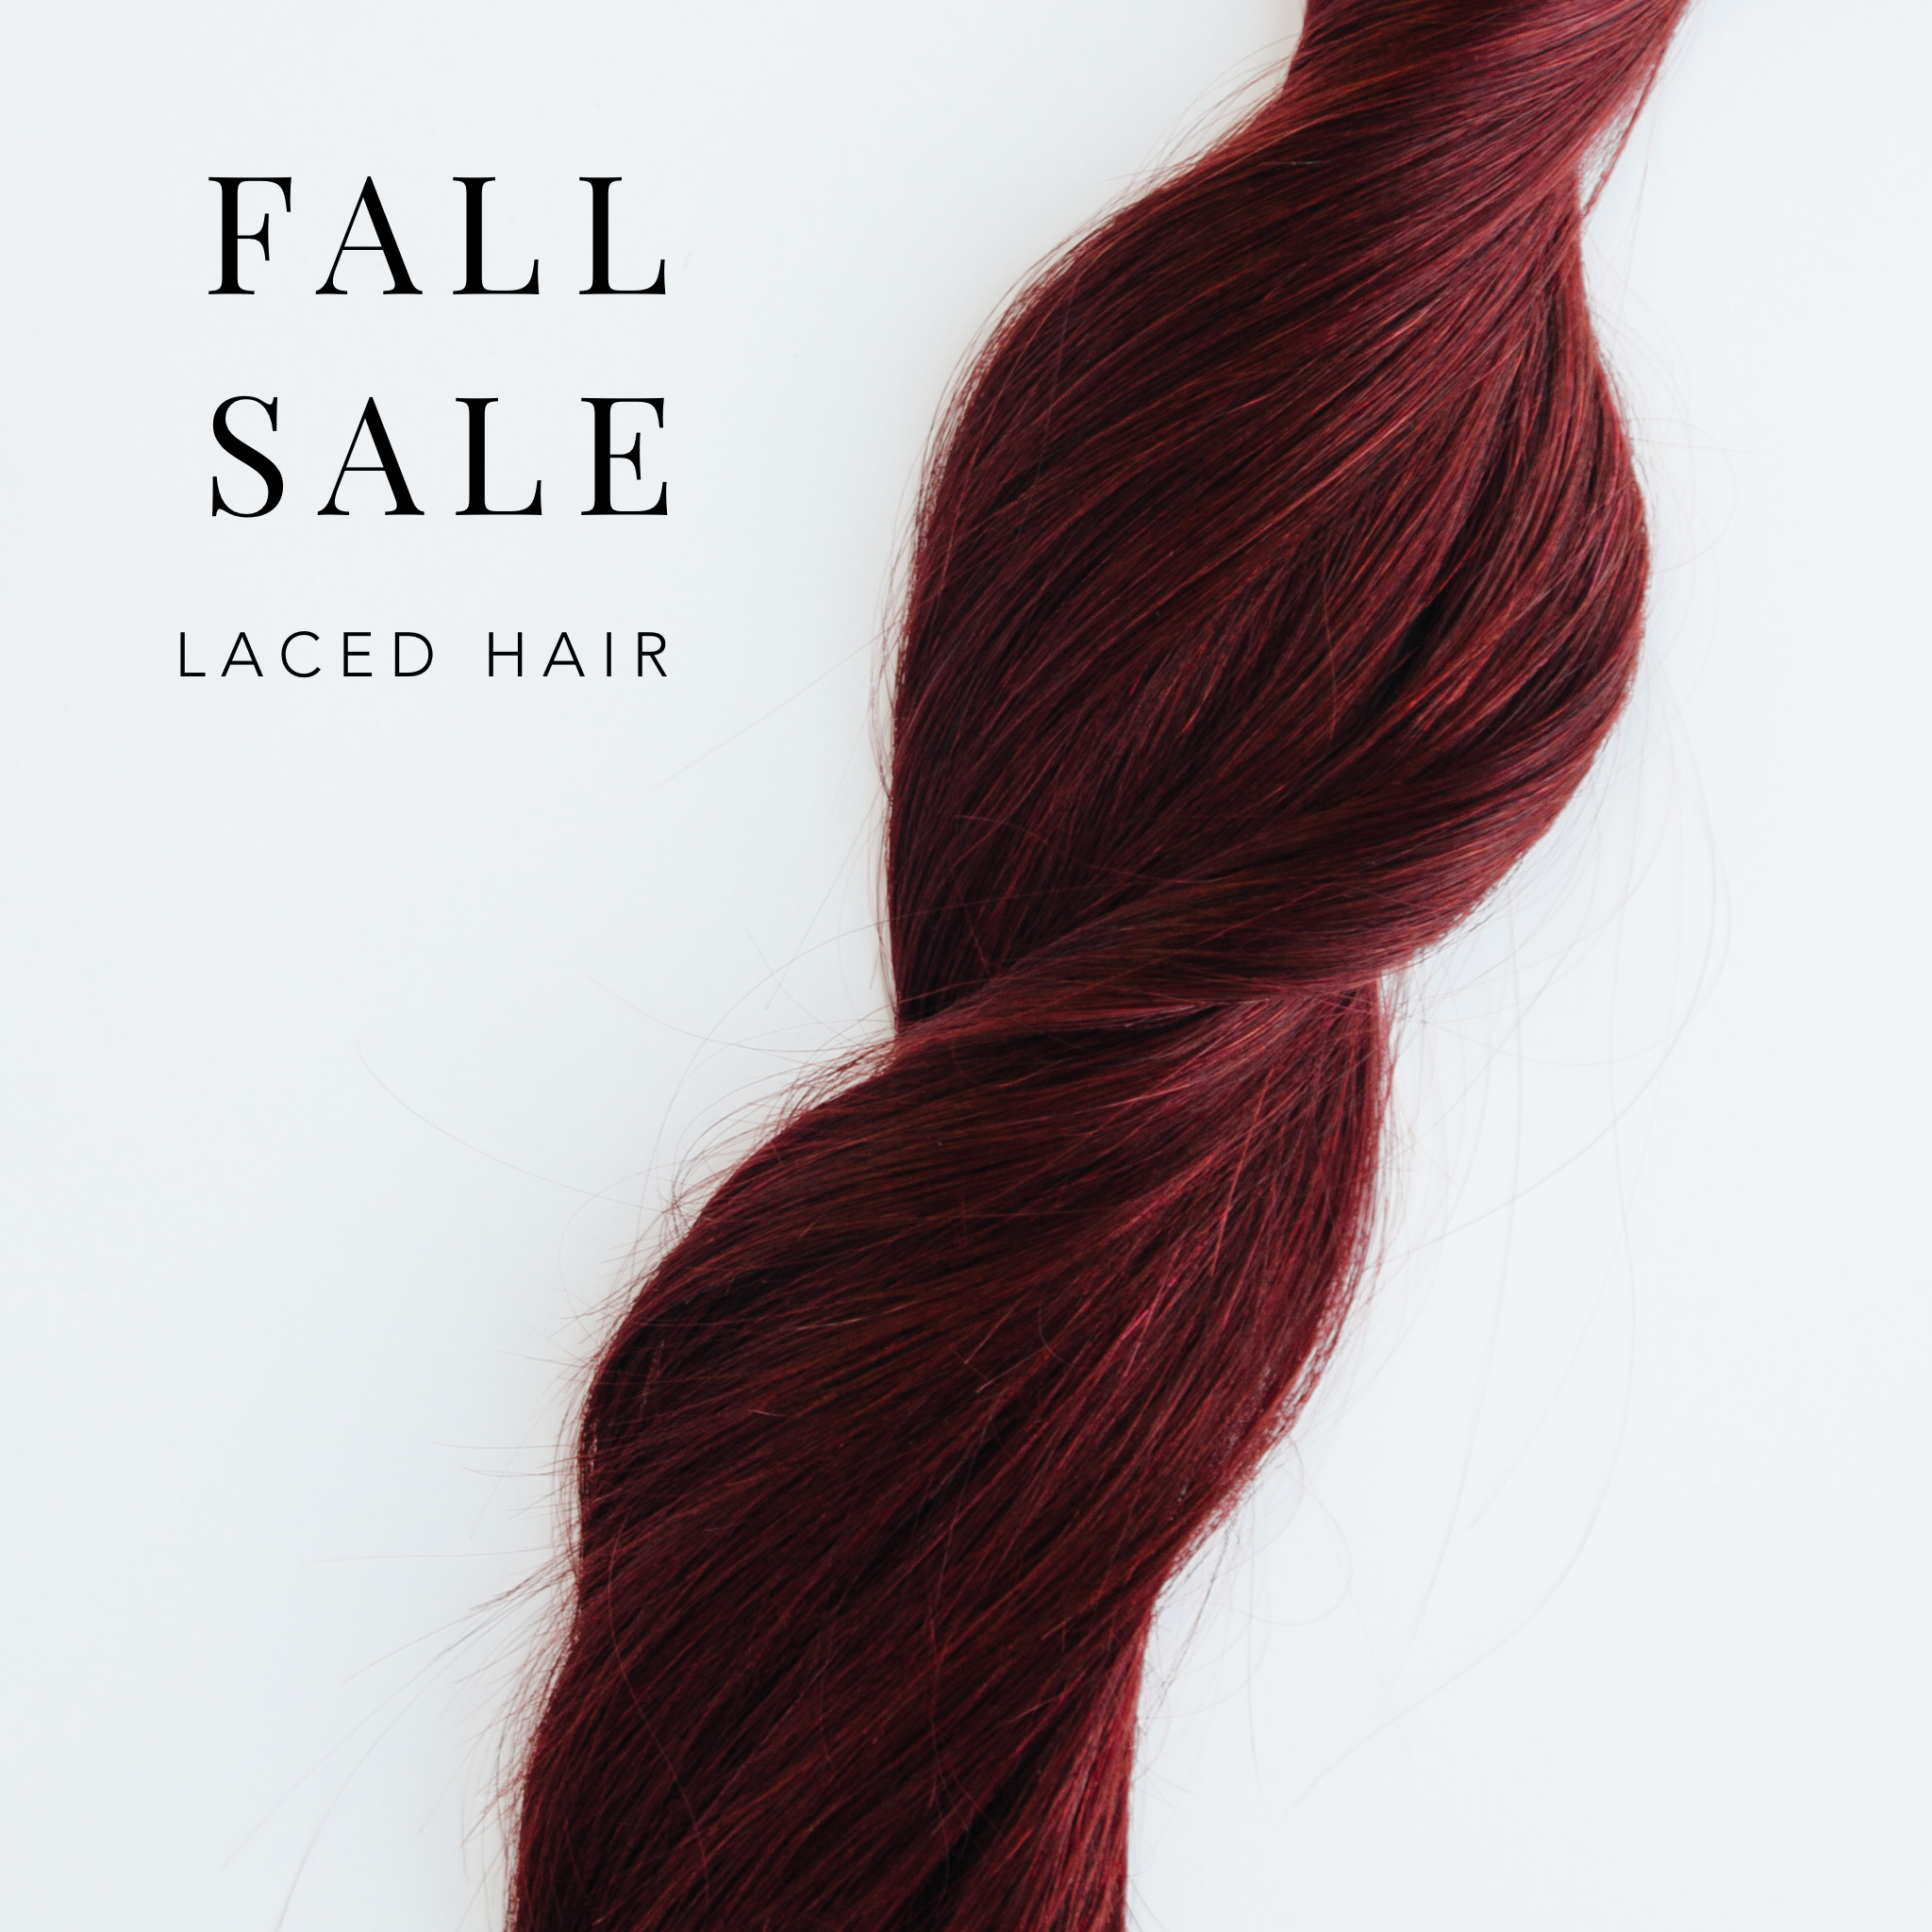 Lacy's Hand Picked Fall Color Collection is on SALE